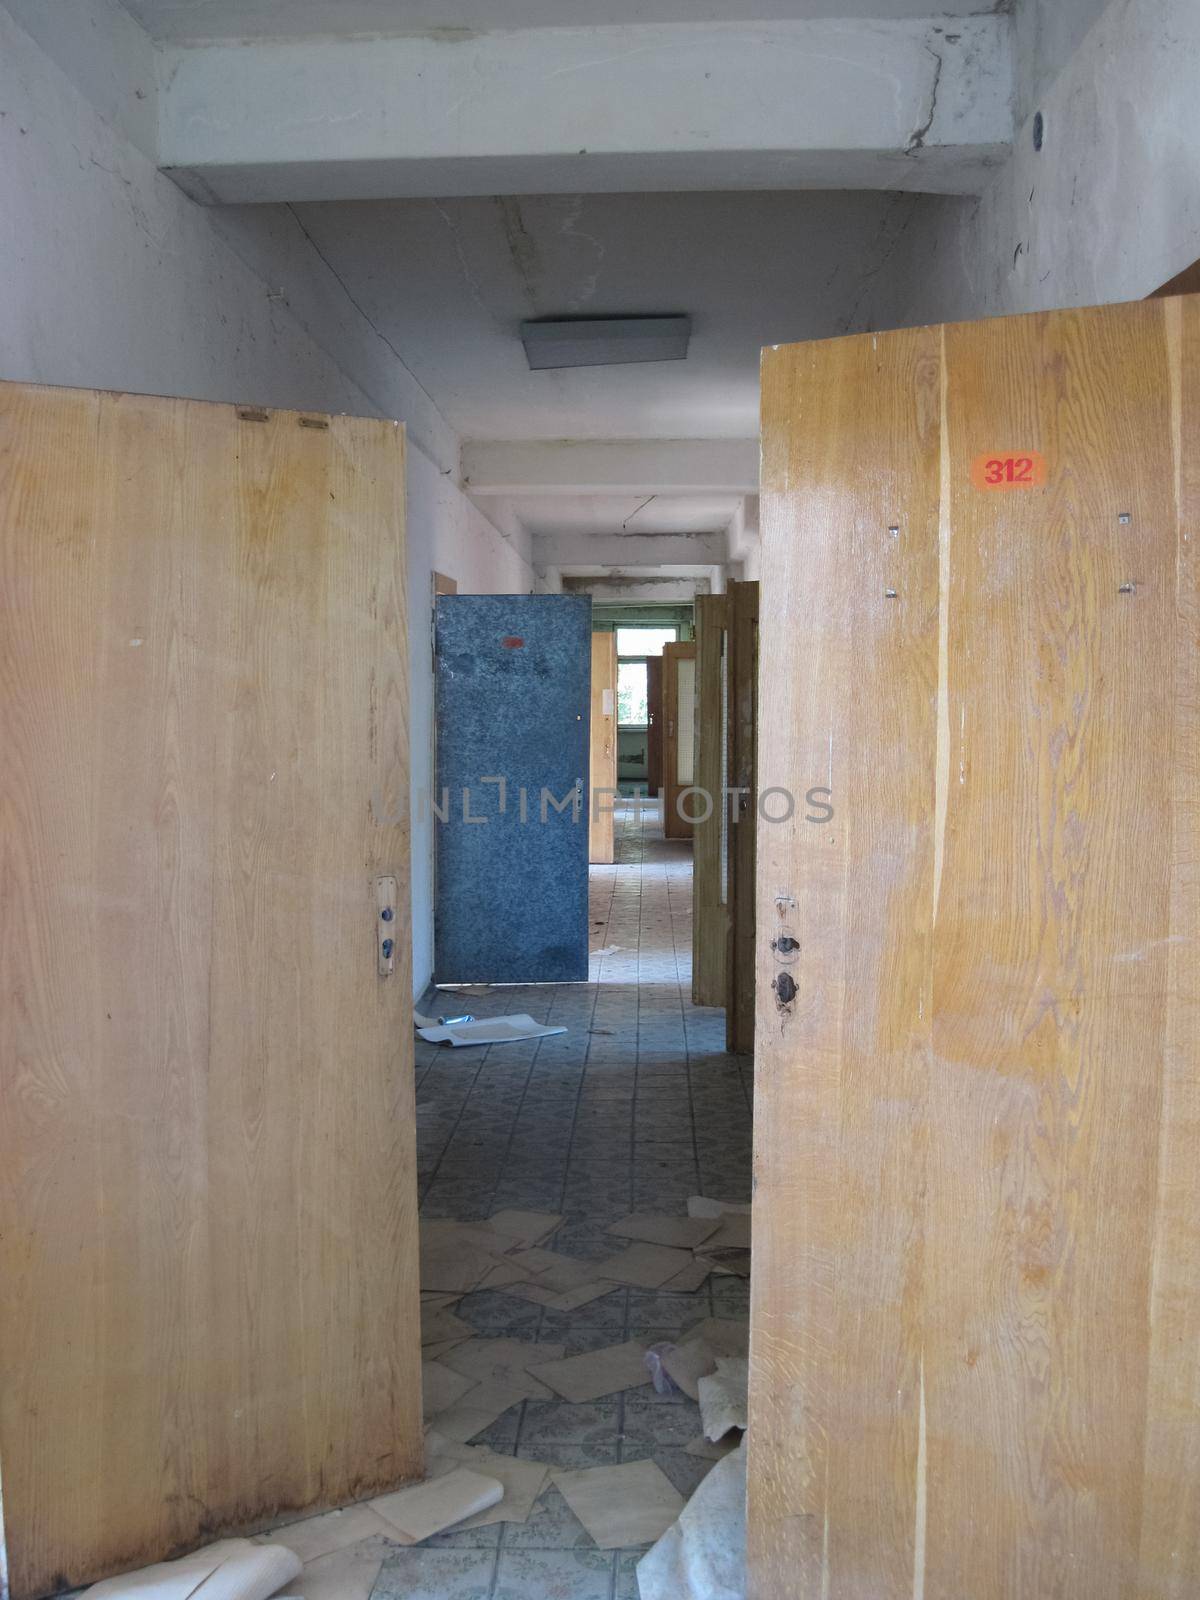 Rooms and corridors of the abandoned industrial building of Chigirin nuclear power plant